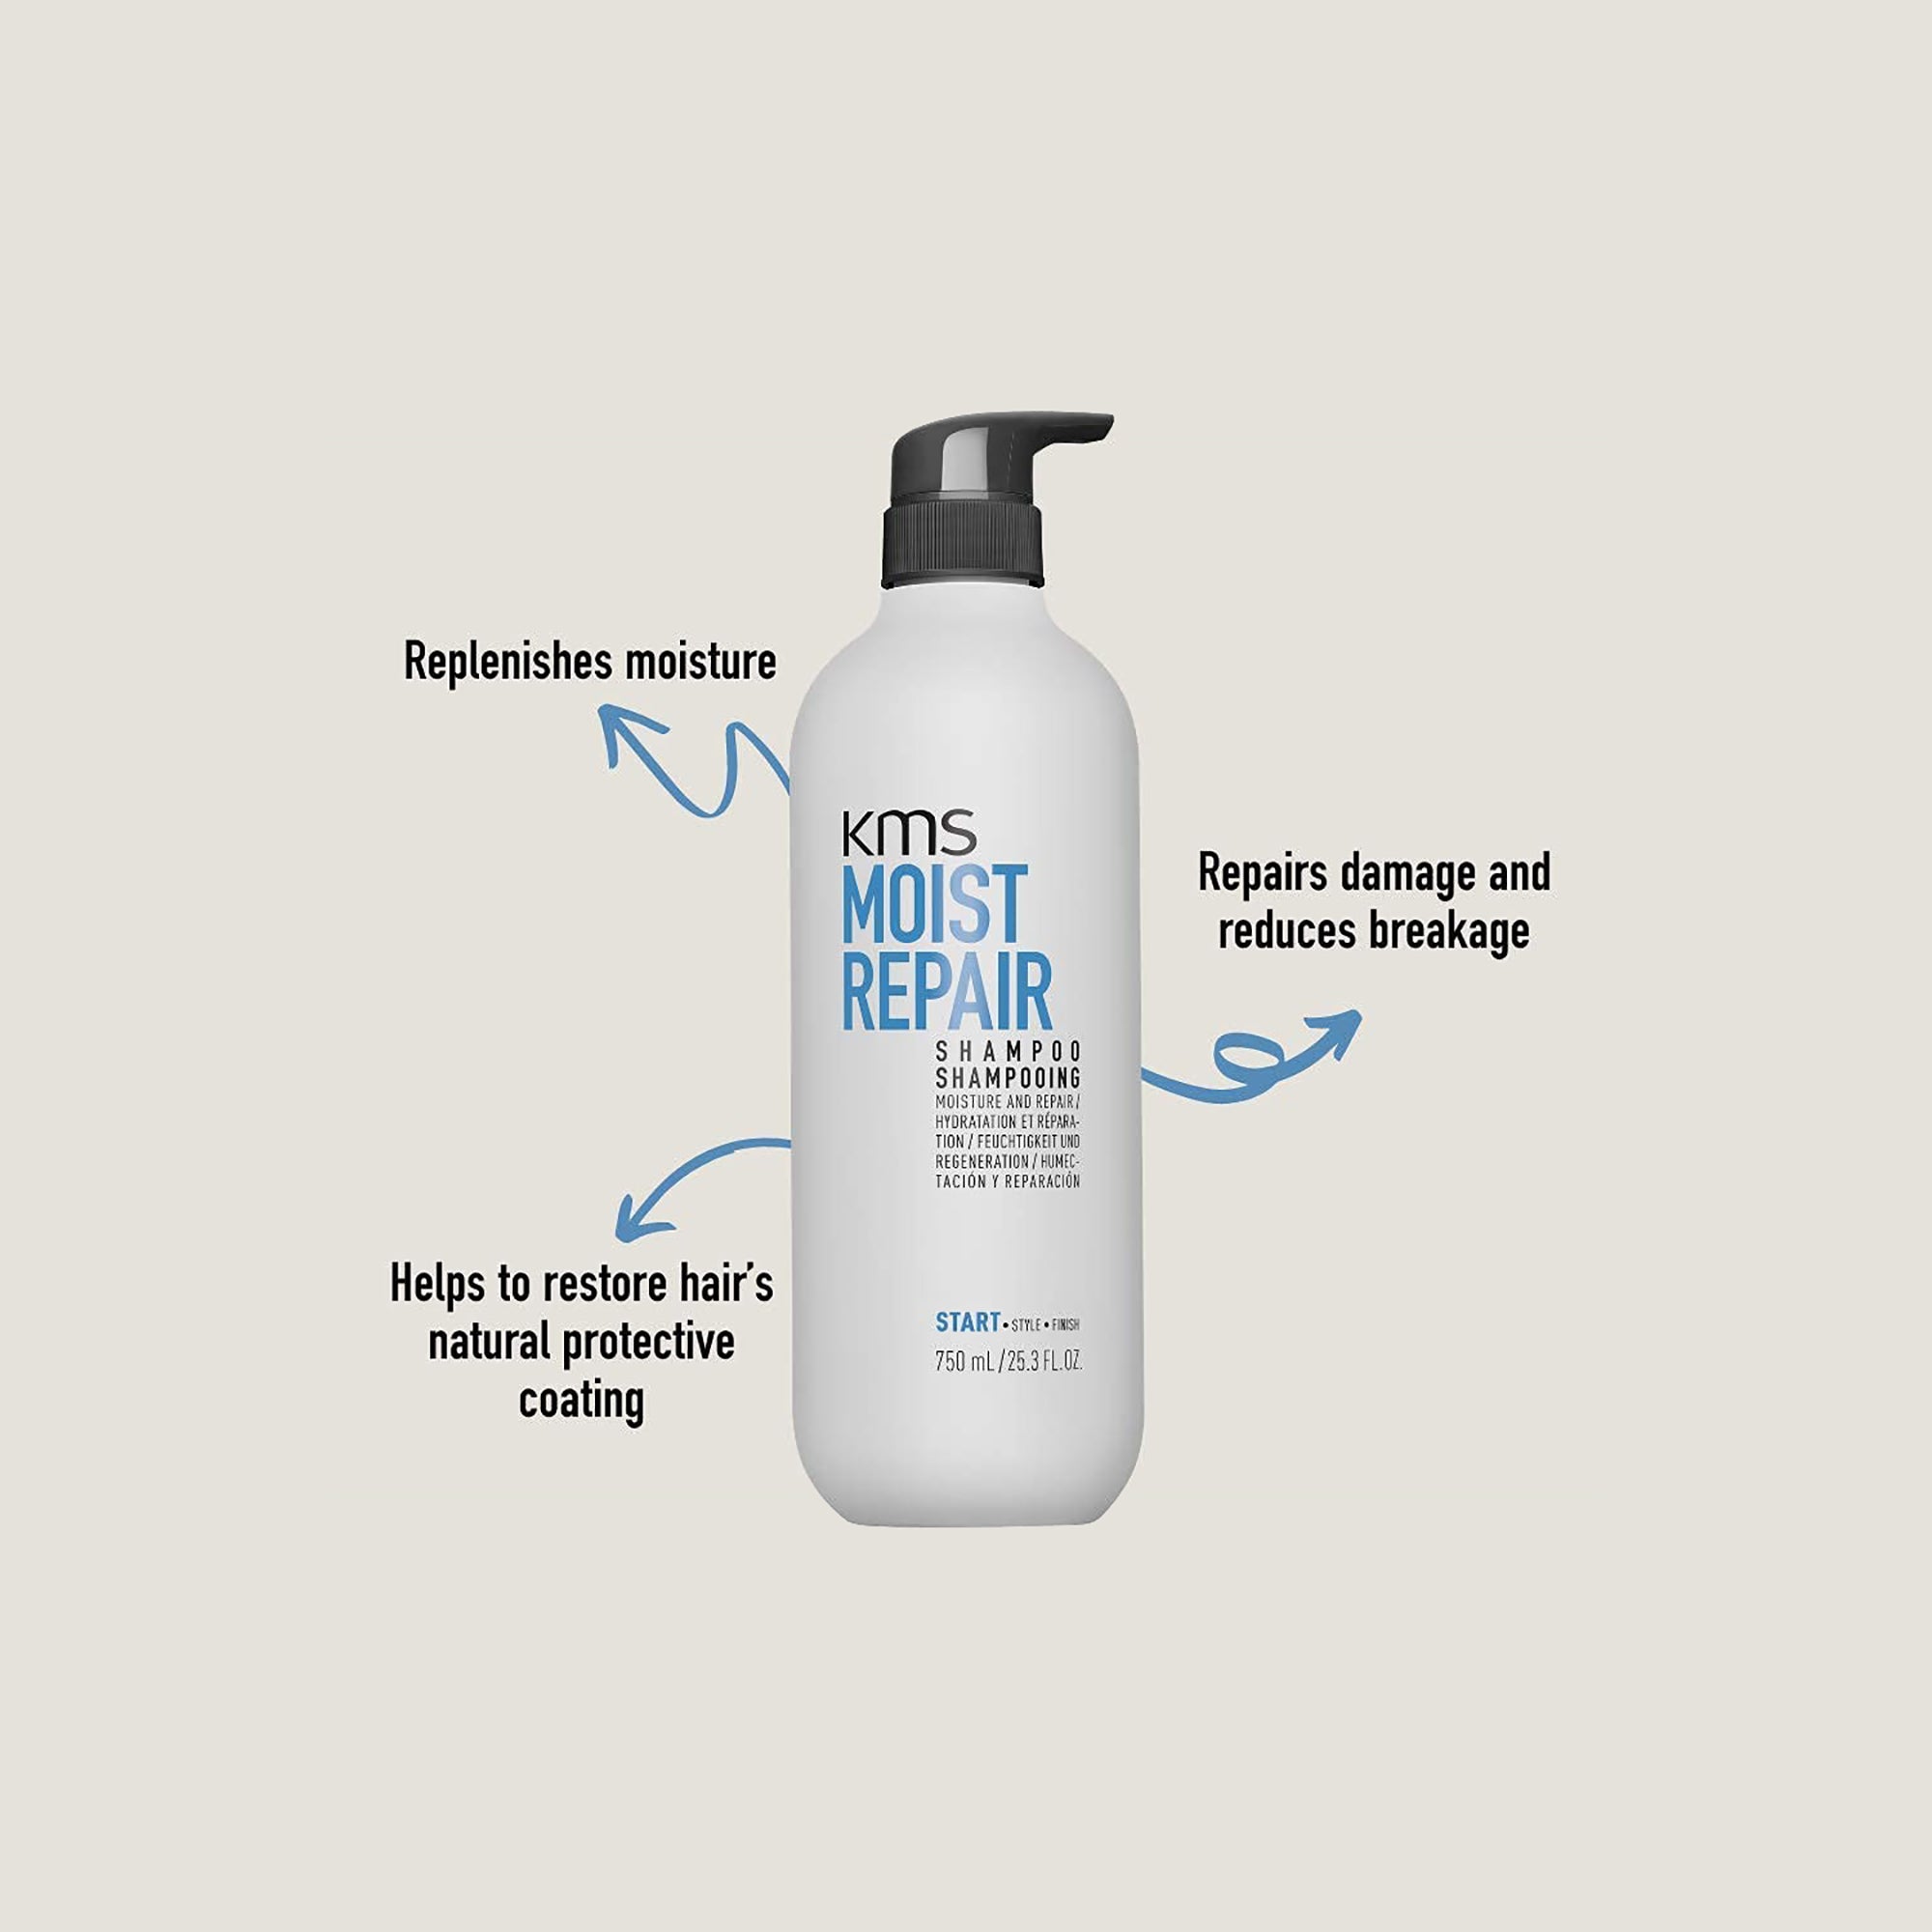 KMS MoistRepair Shampoo and Conditioner Duo - 25oz ($99.50 Value) / 25OZ